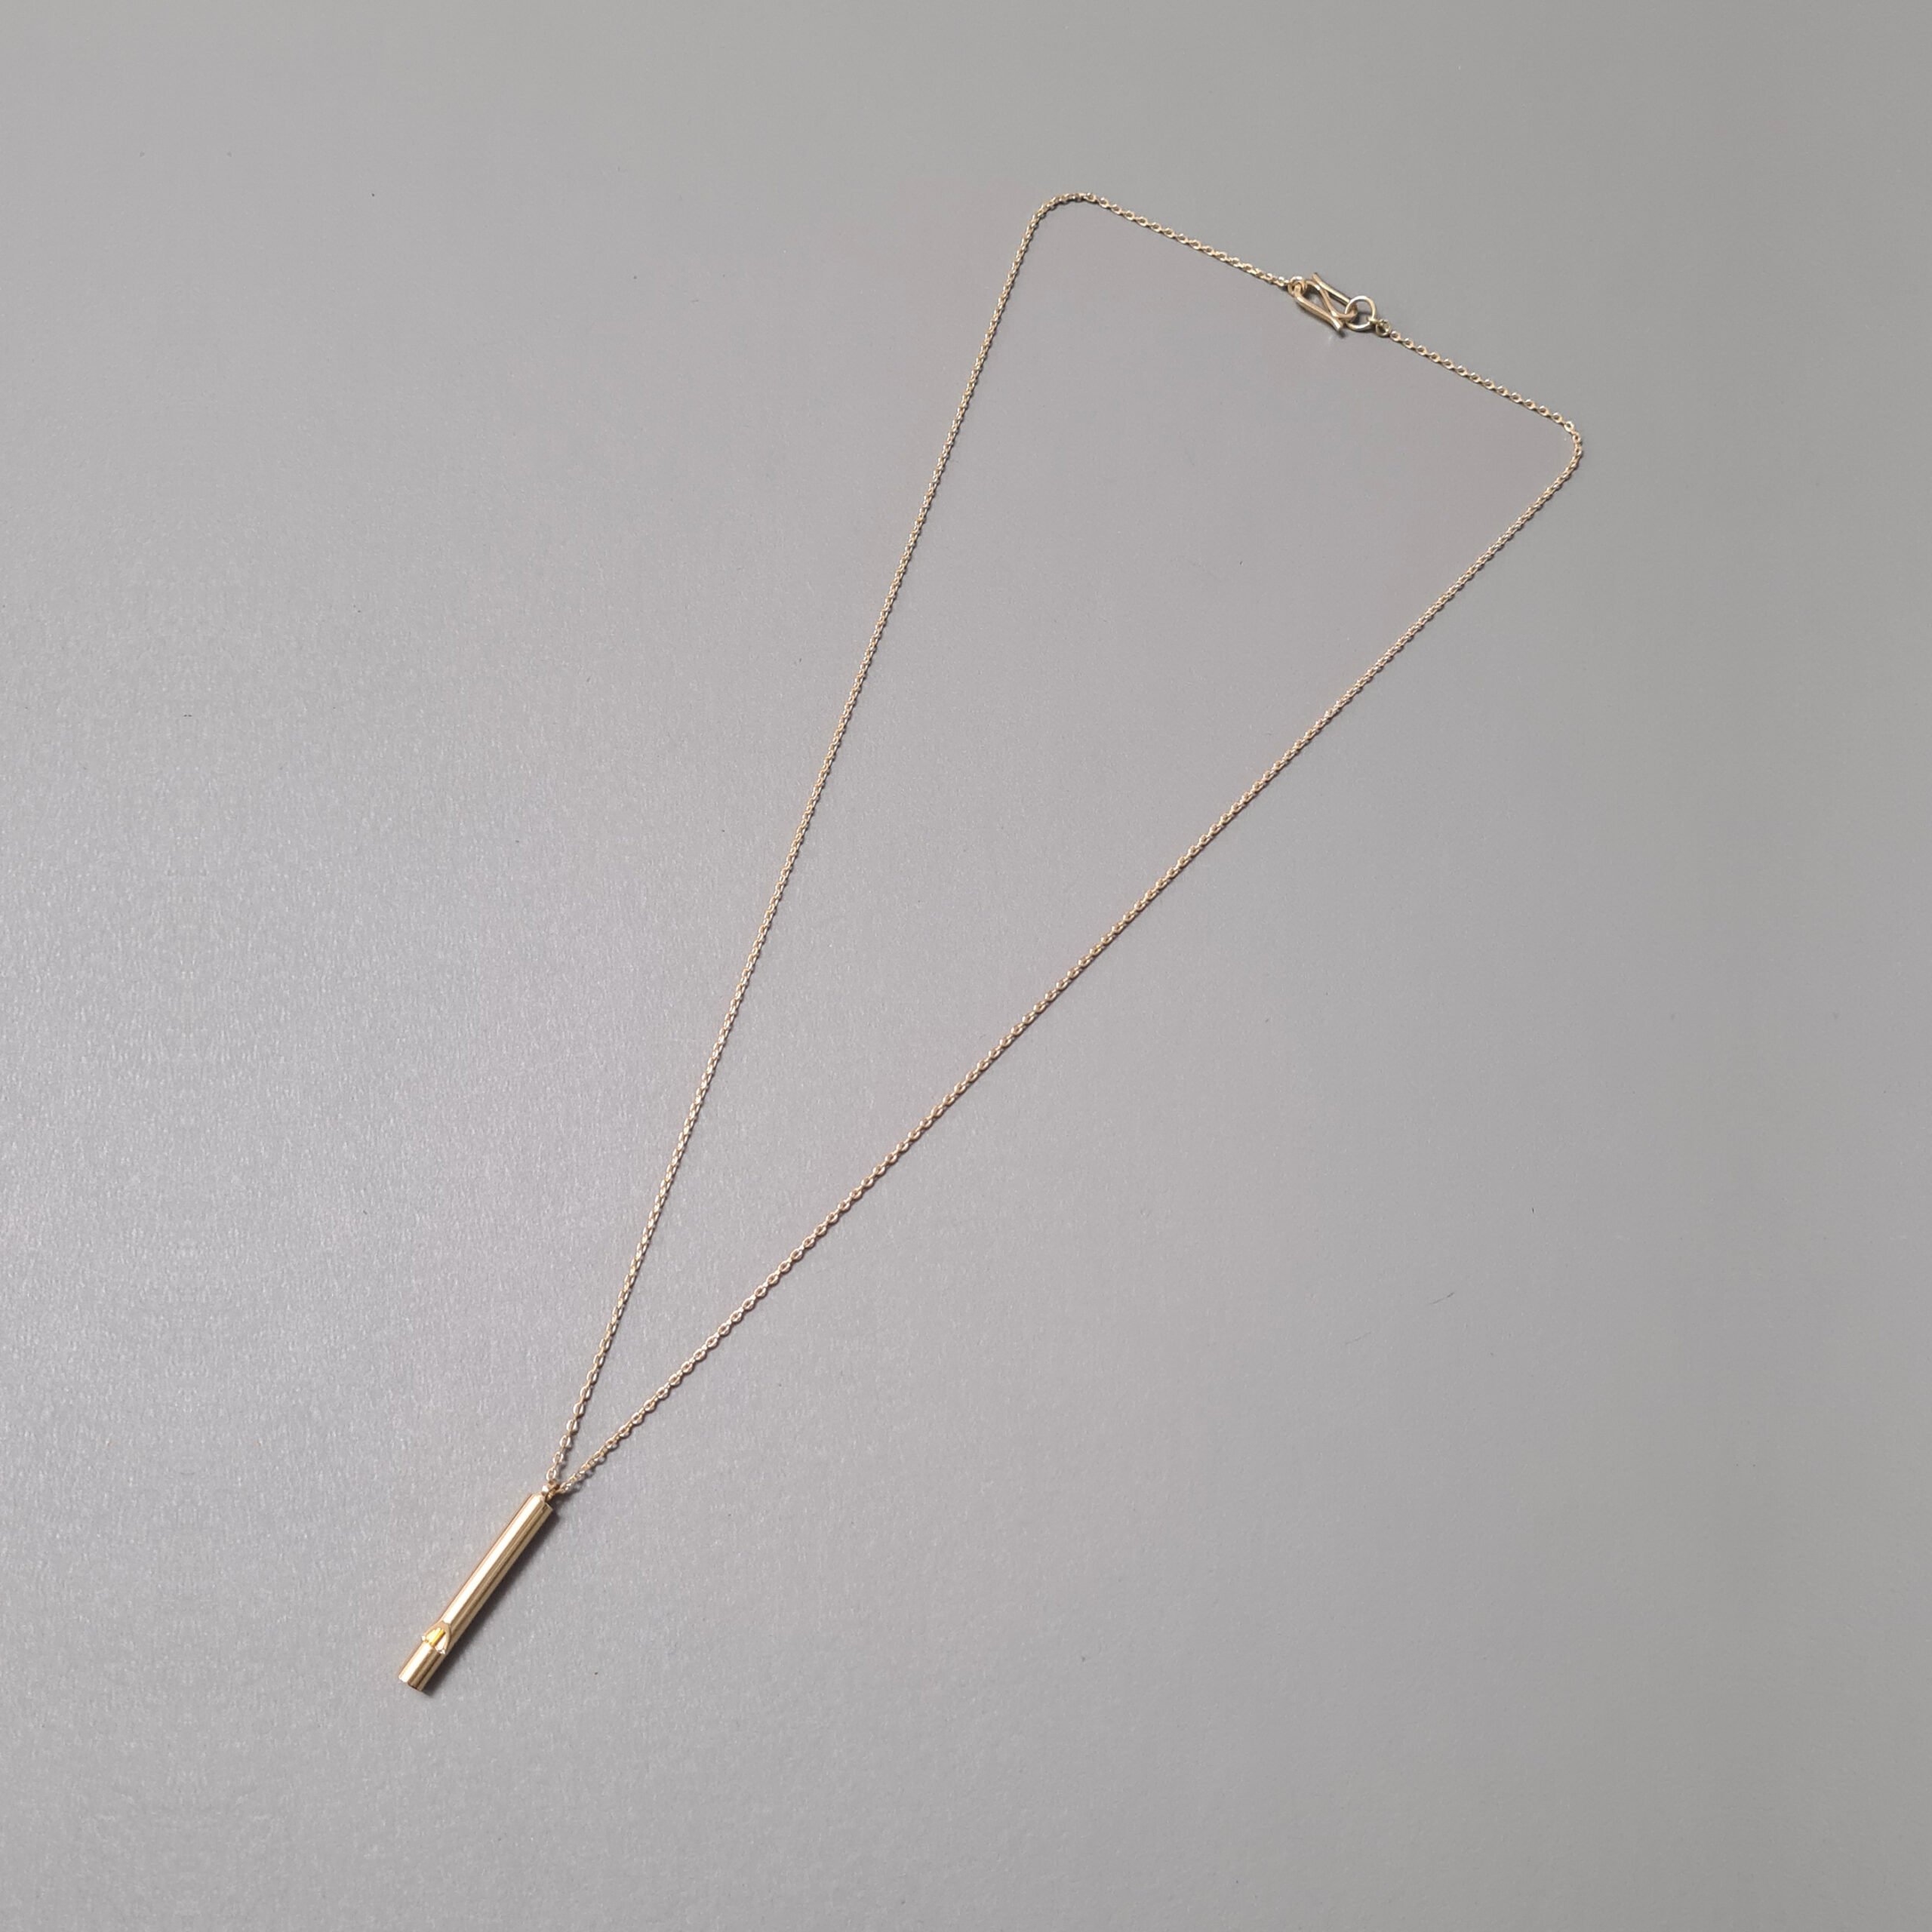 Gold whistle necklace flat lay on grey background.